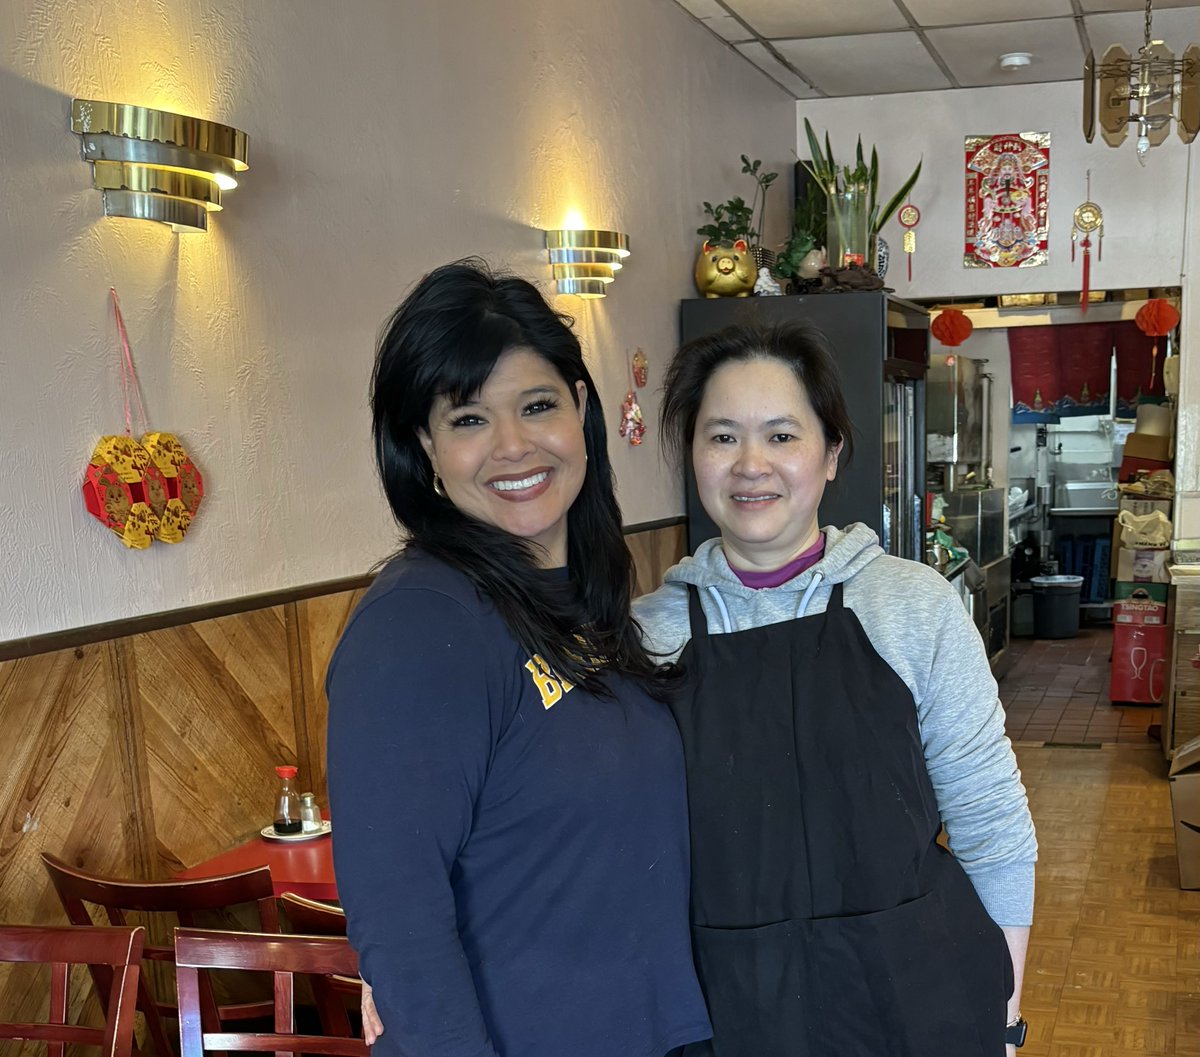 We love our small businesses here in the Richmond. For the 3rd time, someone broke into Dragon River next to our office, where we eat frequently. I agree with Supervisor @conniechansf who says my concern for the safety of my neighbors and children is 'obsessive.' Well, Richmond…